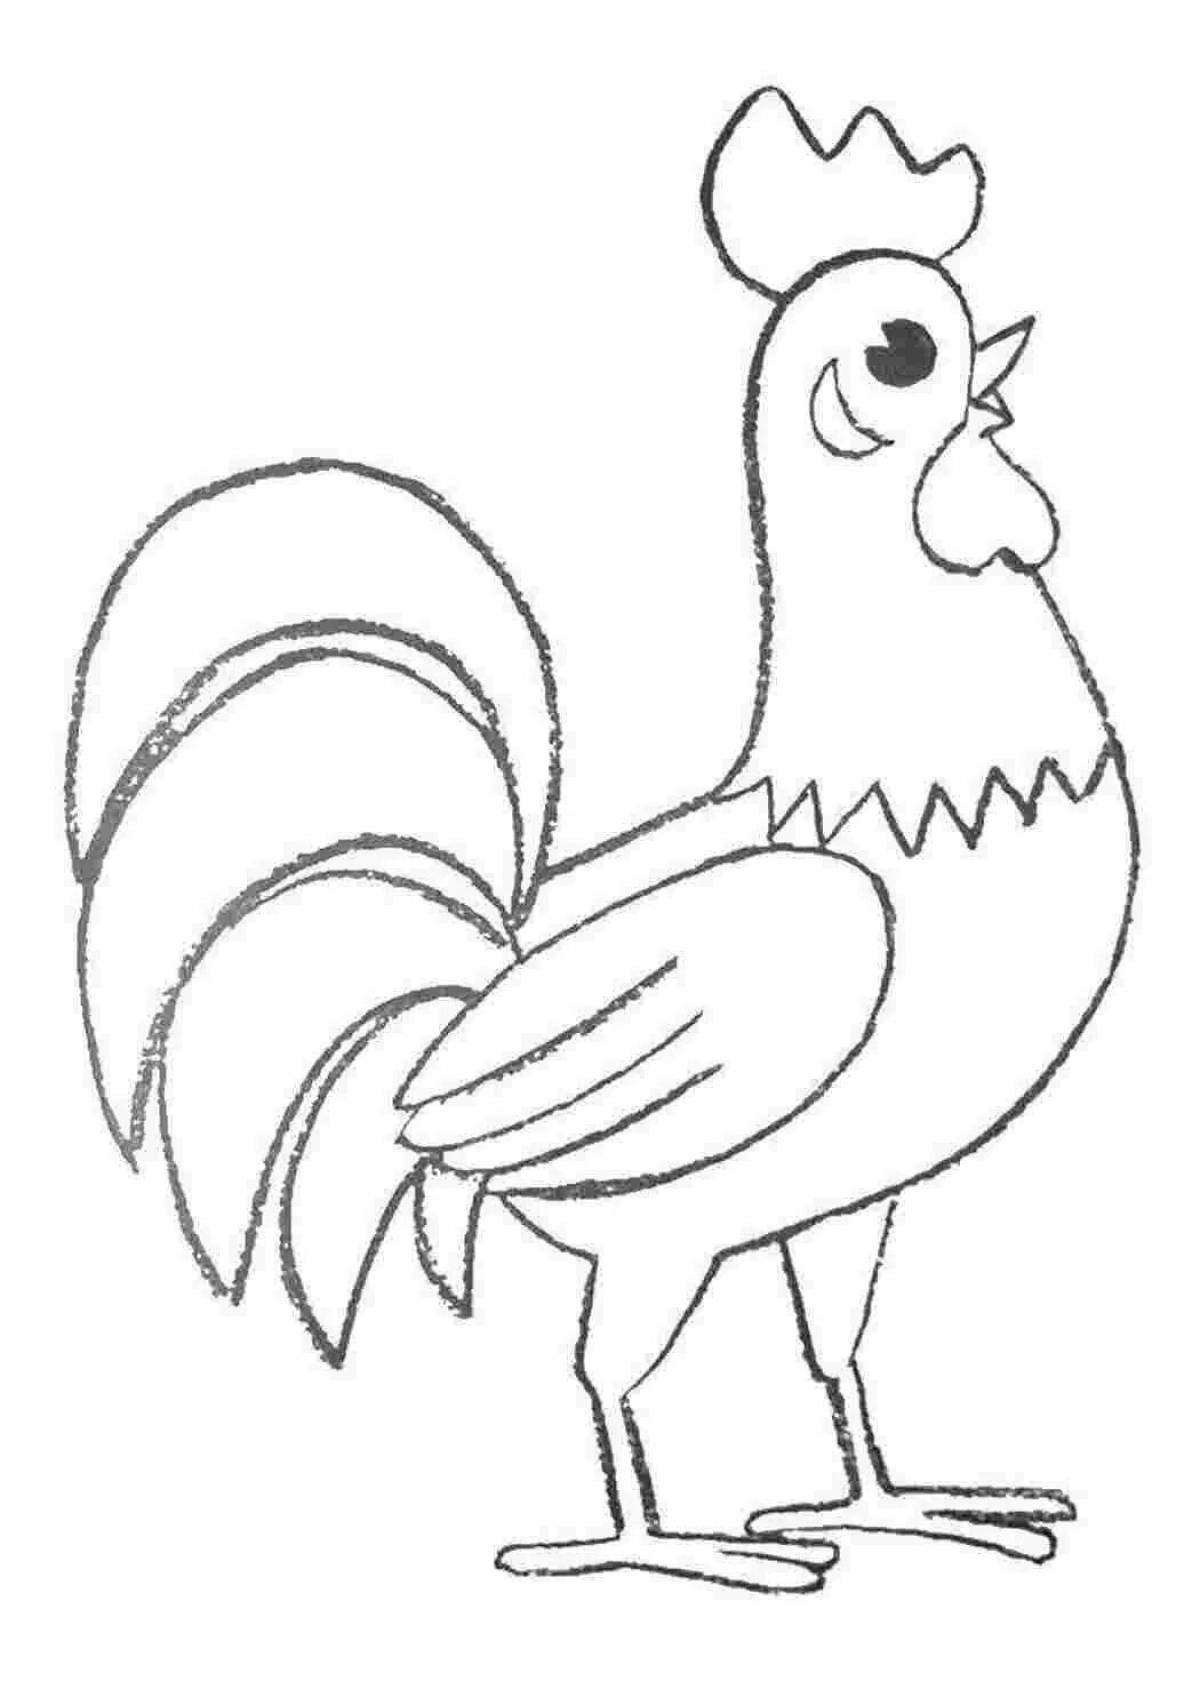 Bright drawing of a cockerel for children